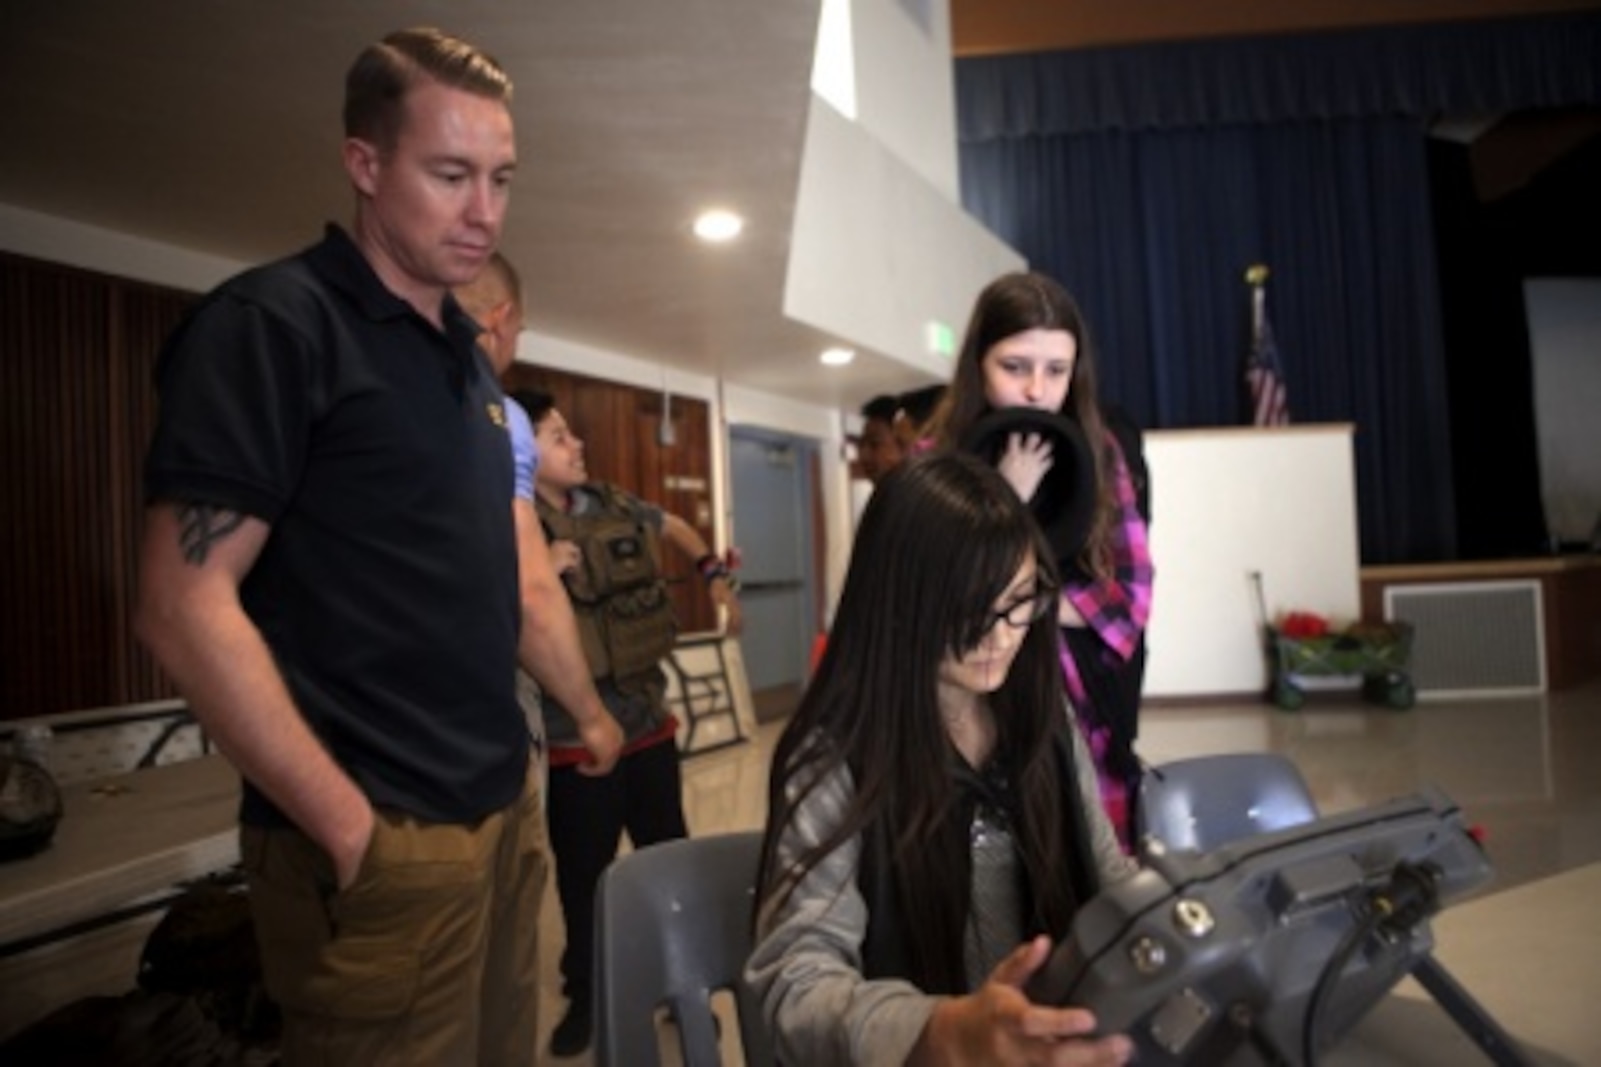 Sergeant Craig Matz, an Explosive Ordnance Disposal technician with 1st EOD Company, 7th Engineer Support Battalion, 1st Marine Logistics Group, supervises a James E. Potter Junior High School student attempting to drive the ANDORS EOD robot during a visit to the school in Fallbrook, Calif., Feb. 29, 2016. During the visit, EOD Marines explained the various capabilities of military robots and performed a practical application of EOD’s bomb-detecting robots.